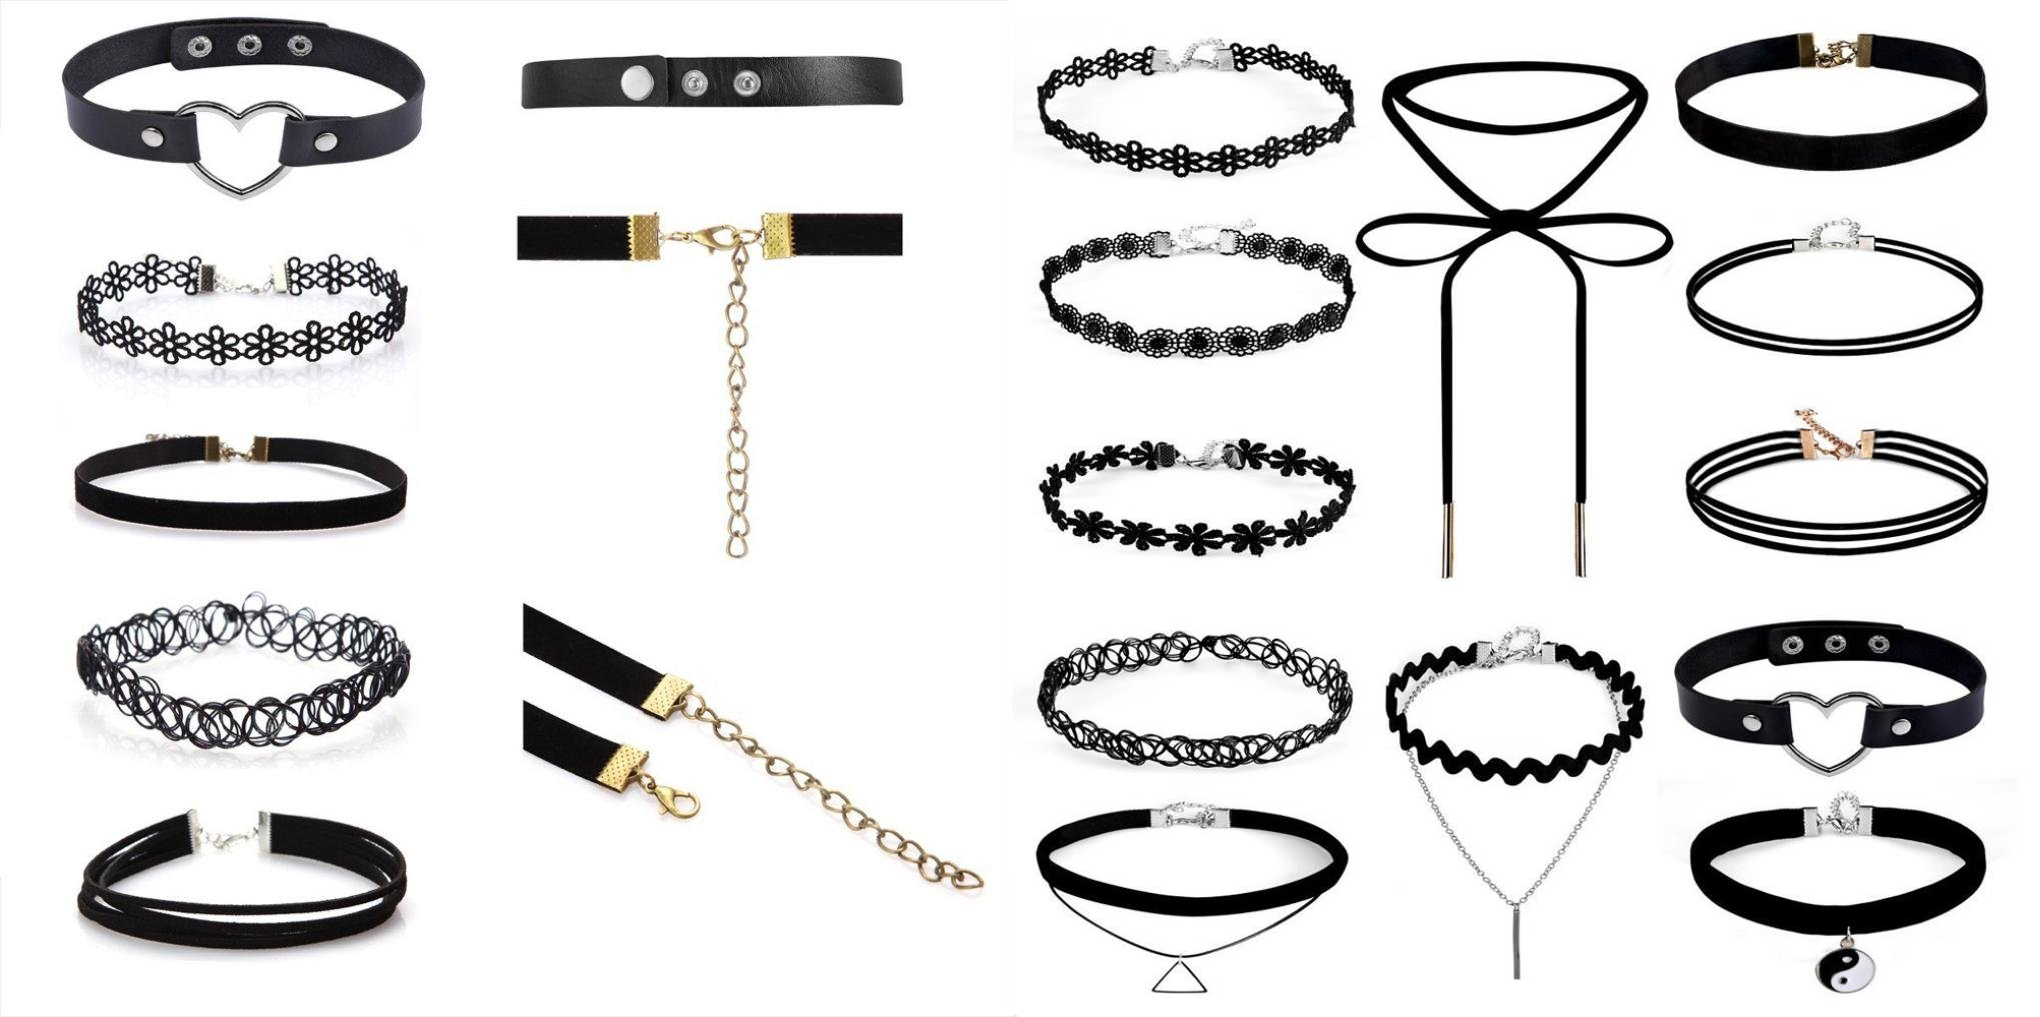 WOW!! 12 Chokers For Only $3.99 + $1.00 Shipping!